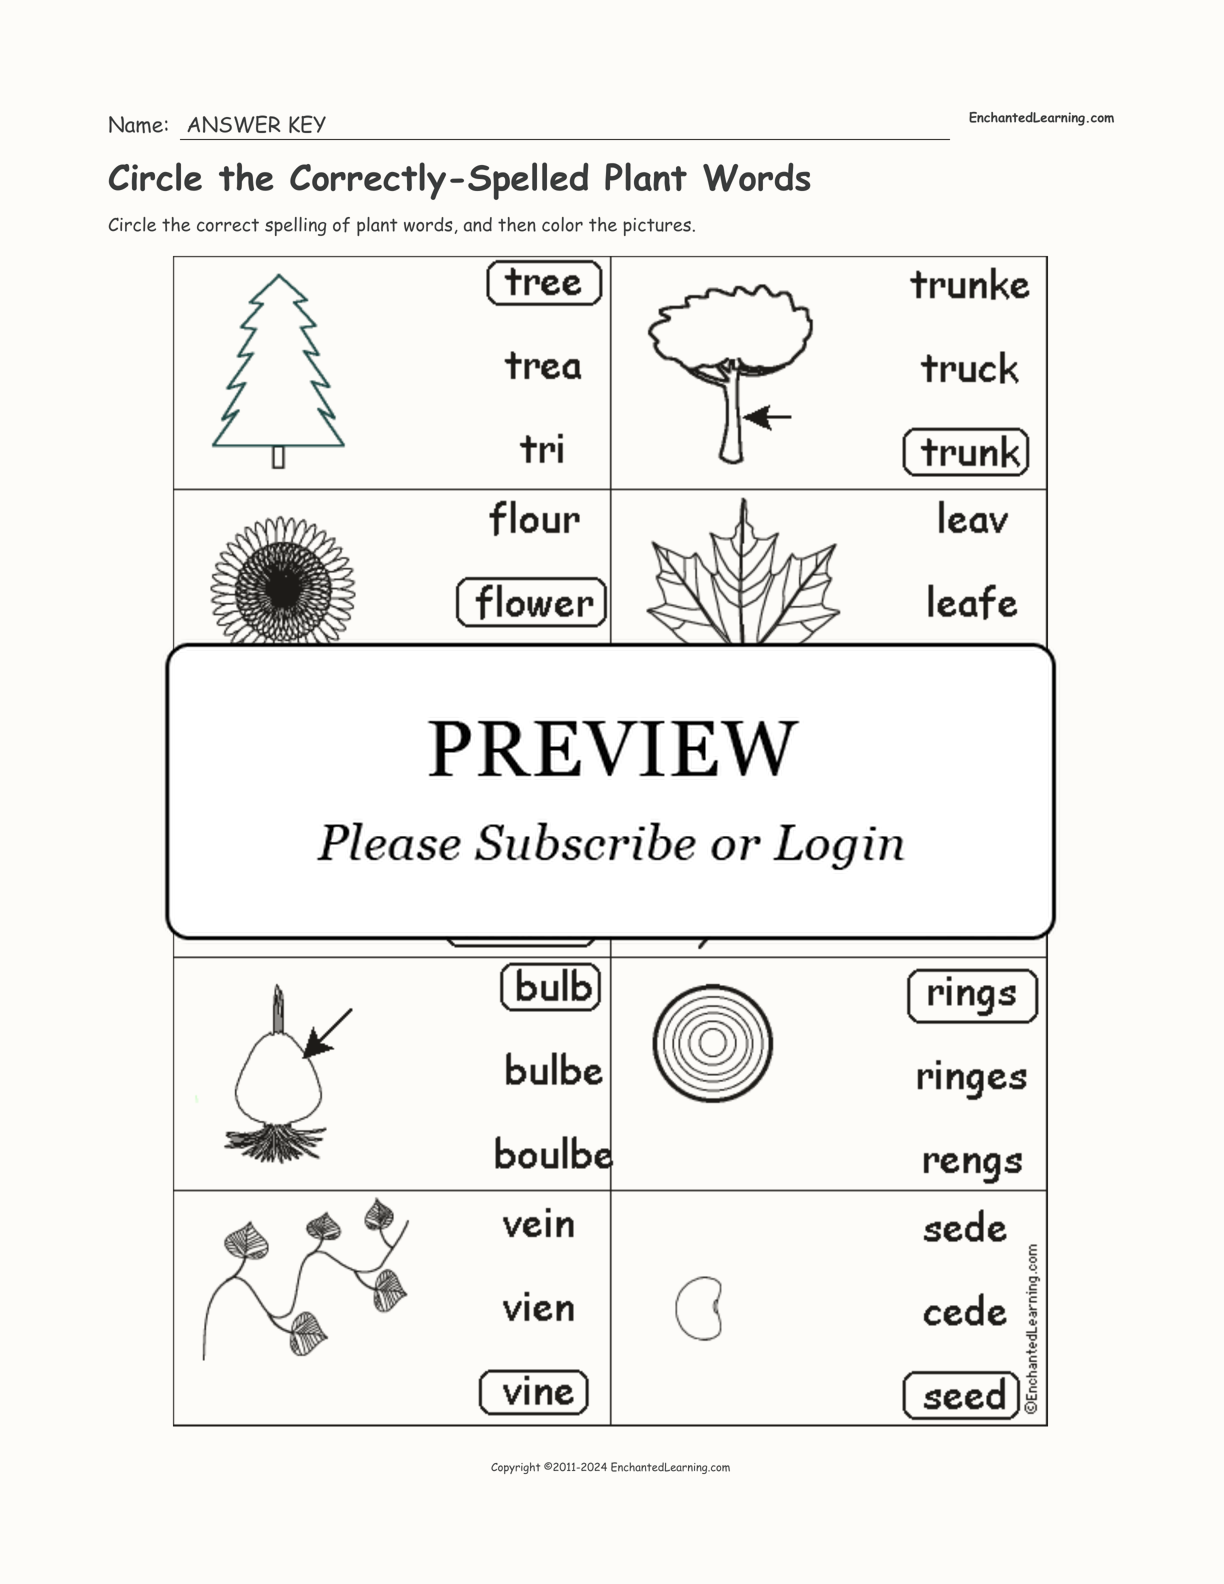 Circle the Correctly-Spelled Plant Words interactive worksheet page 2